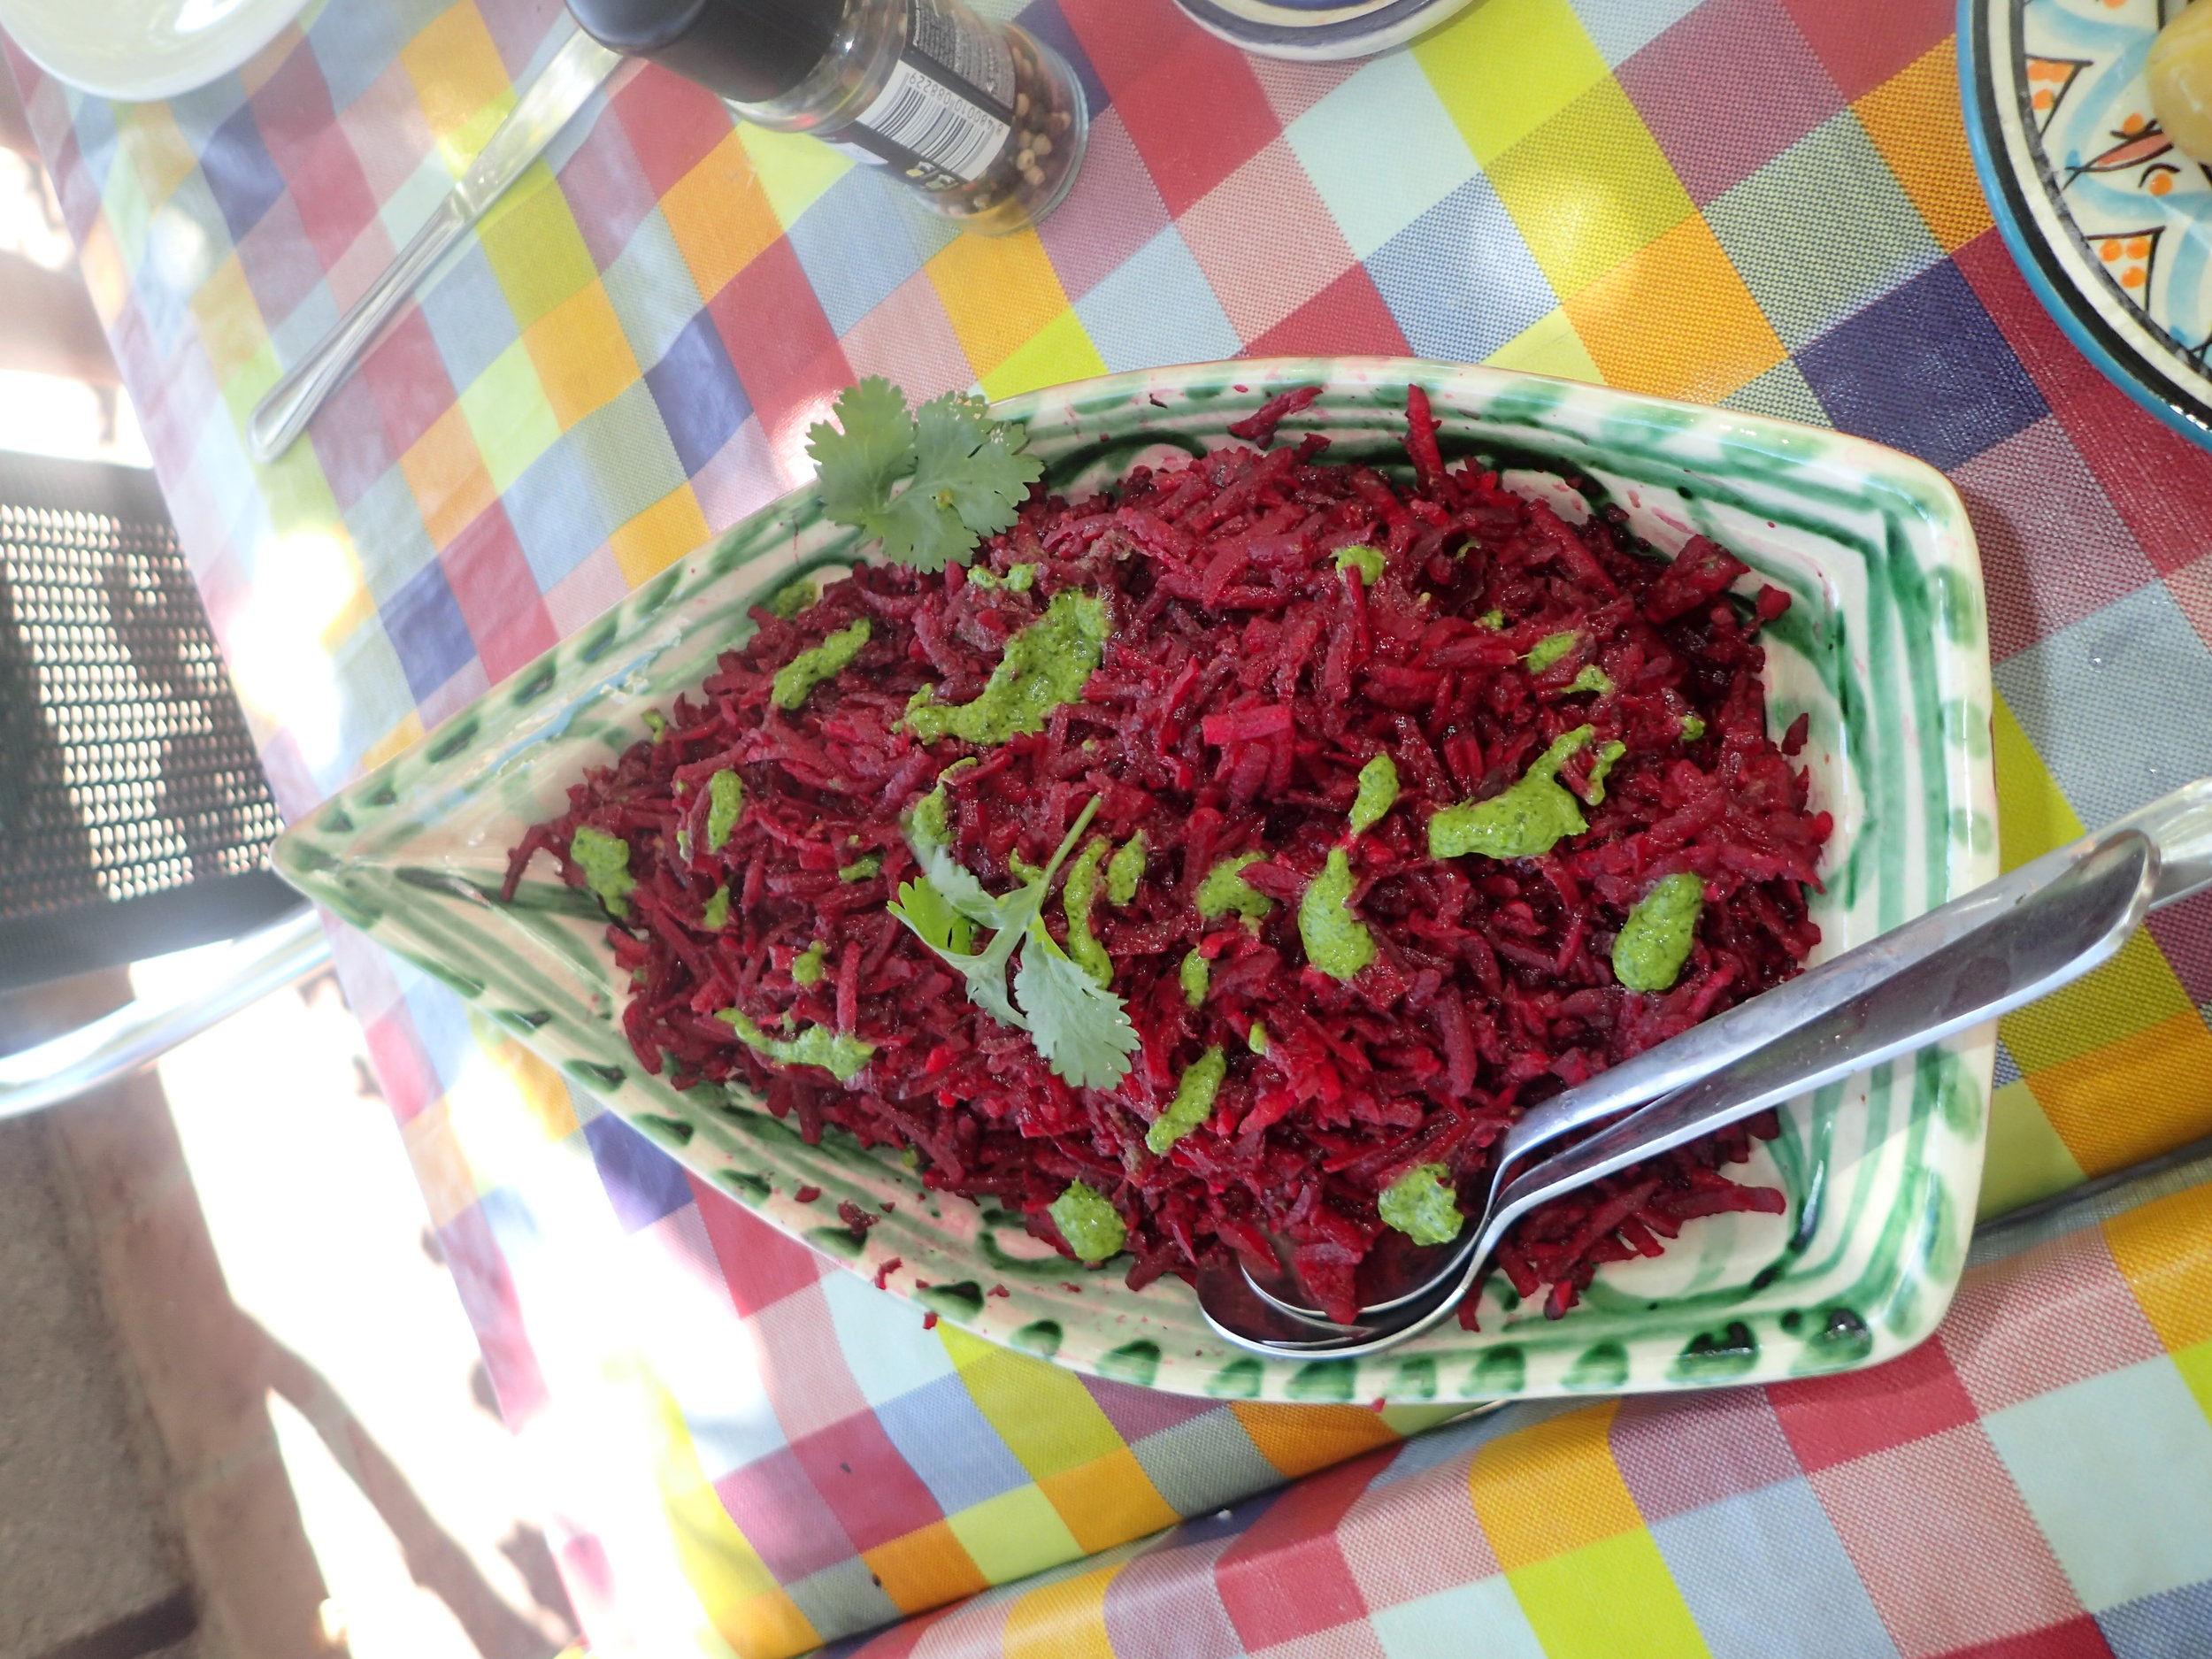 Beet salad at Yin Yang Yoga retreat in the Malaga mountains in Spain with Jane Bakx Yoga (Copy) (Copy)